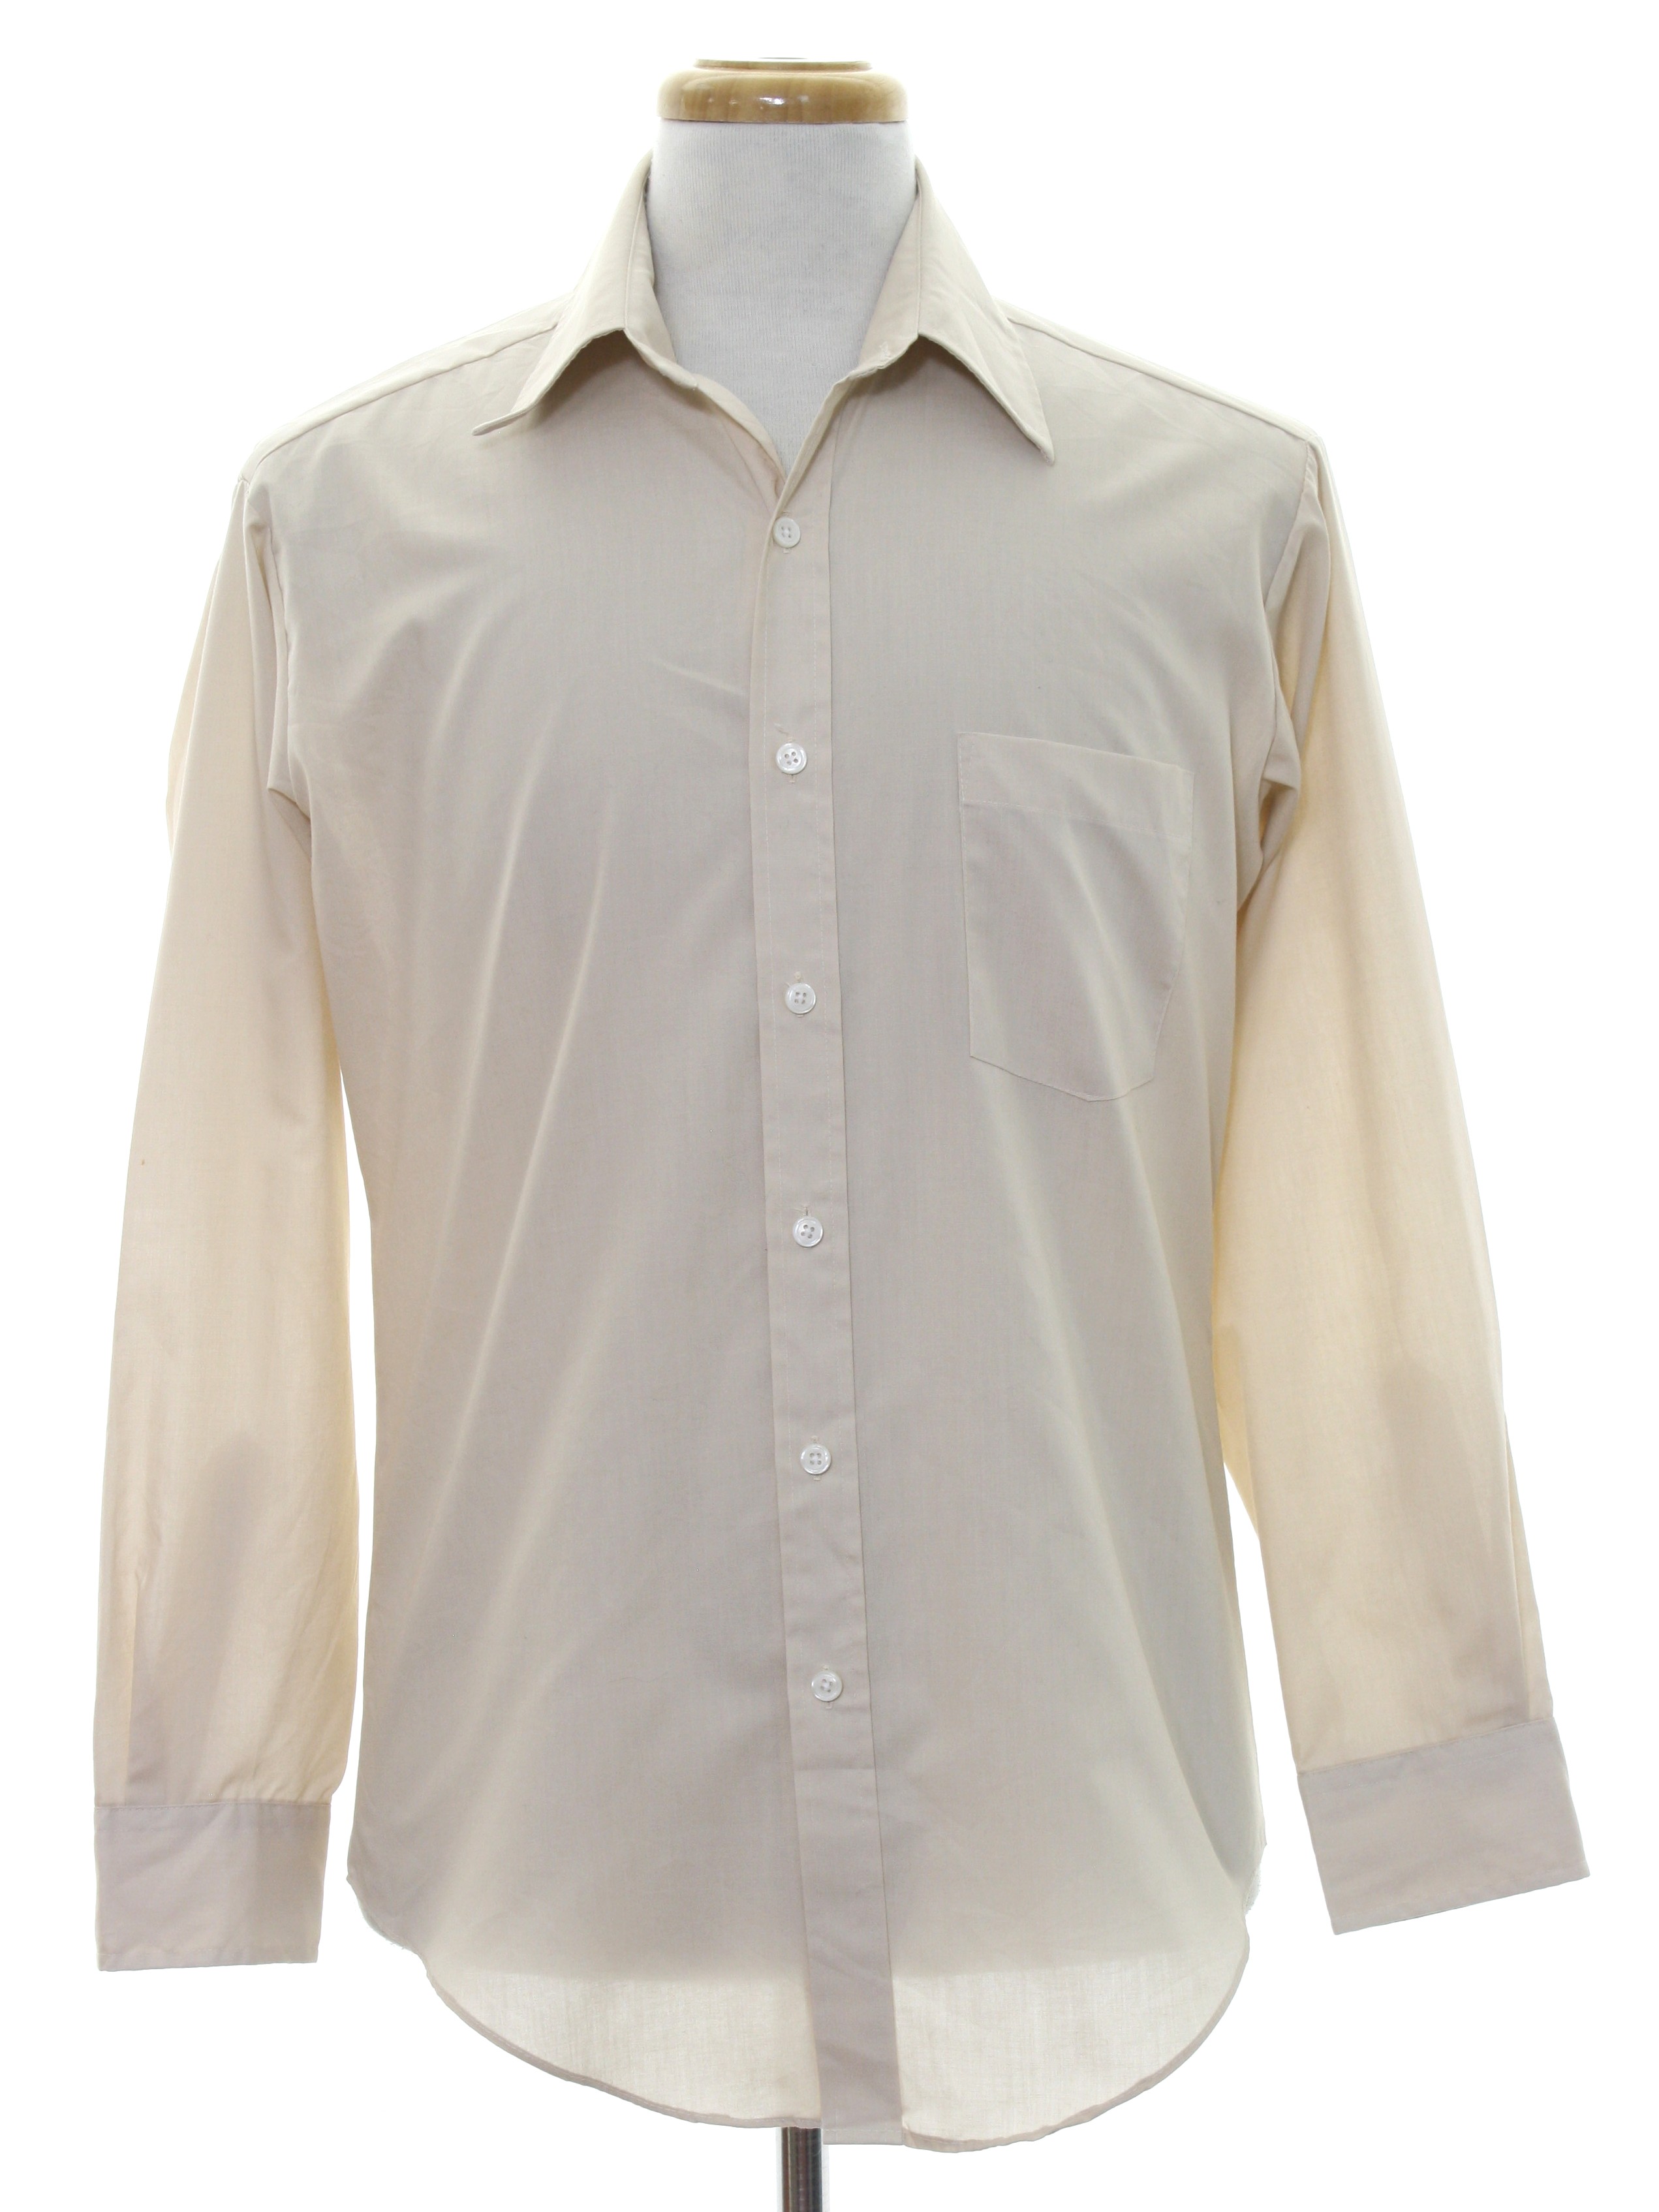 Retro 1970's Shirt (Sears) : 70s -Sears- Mens beige polyester cotton ...